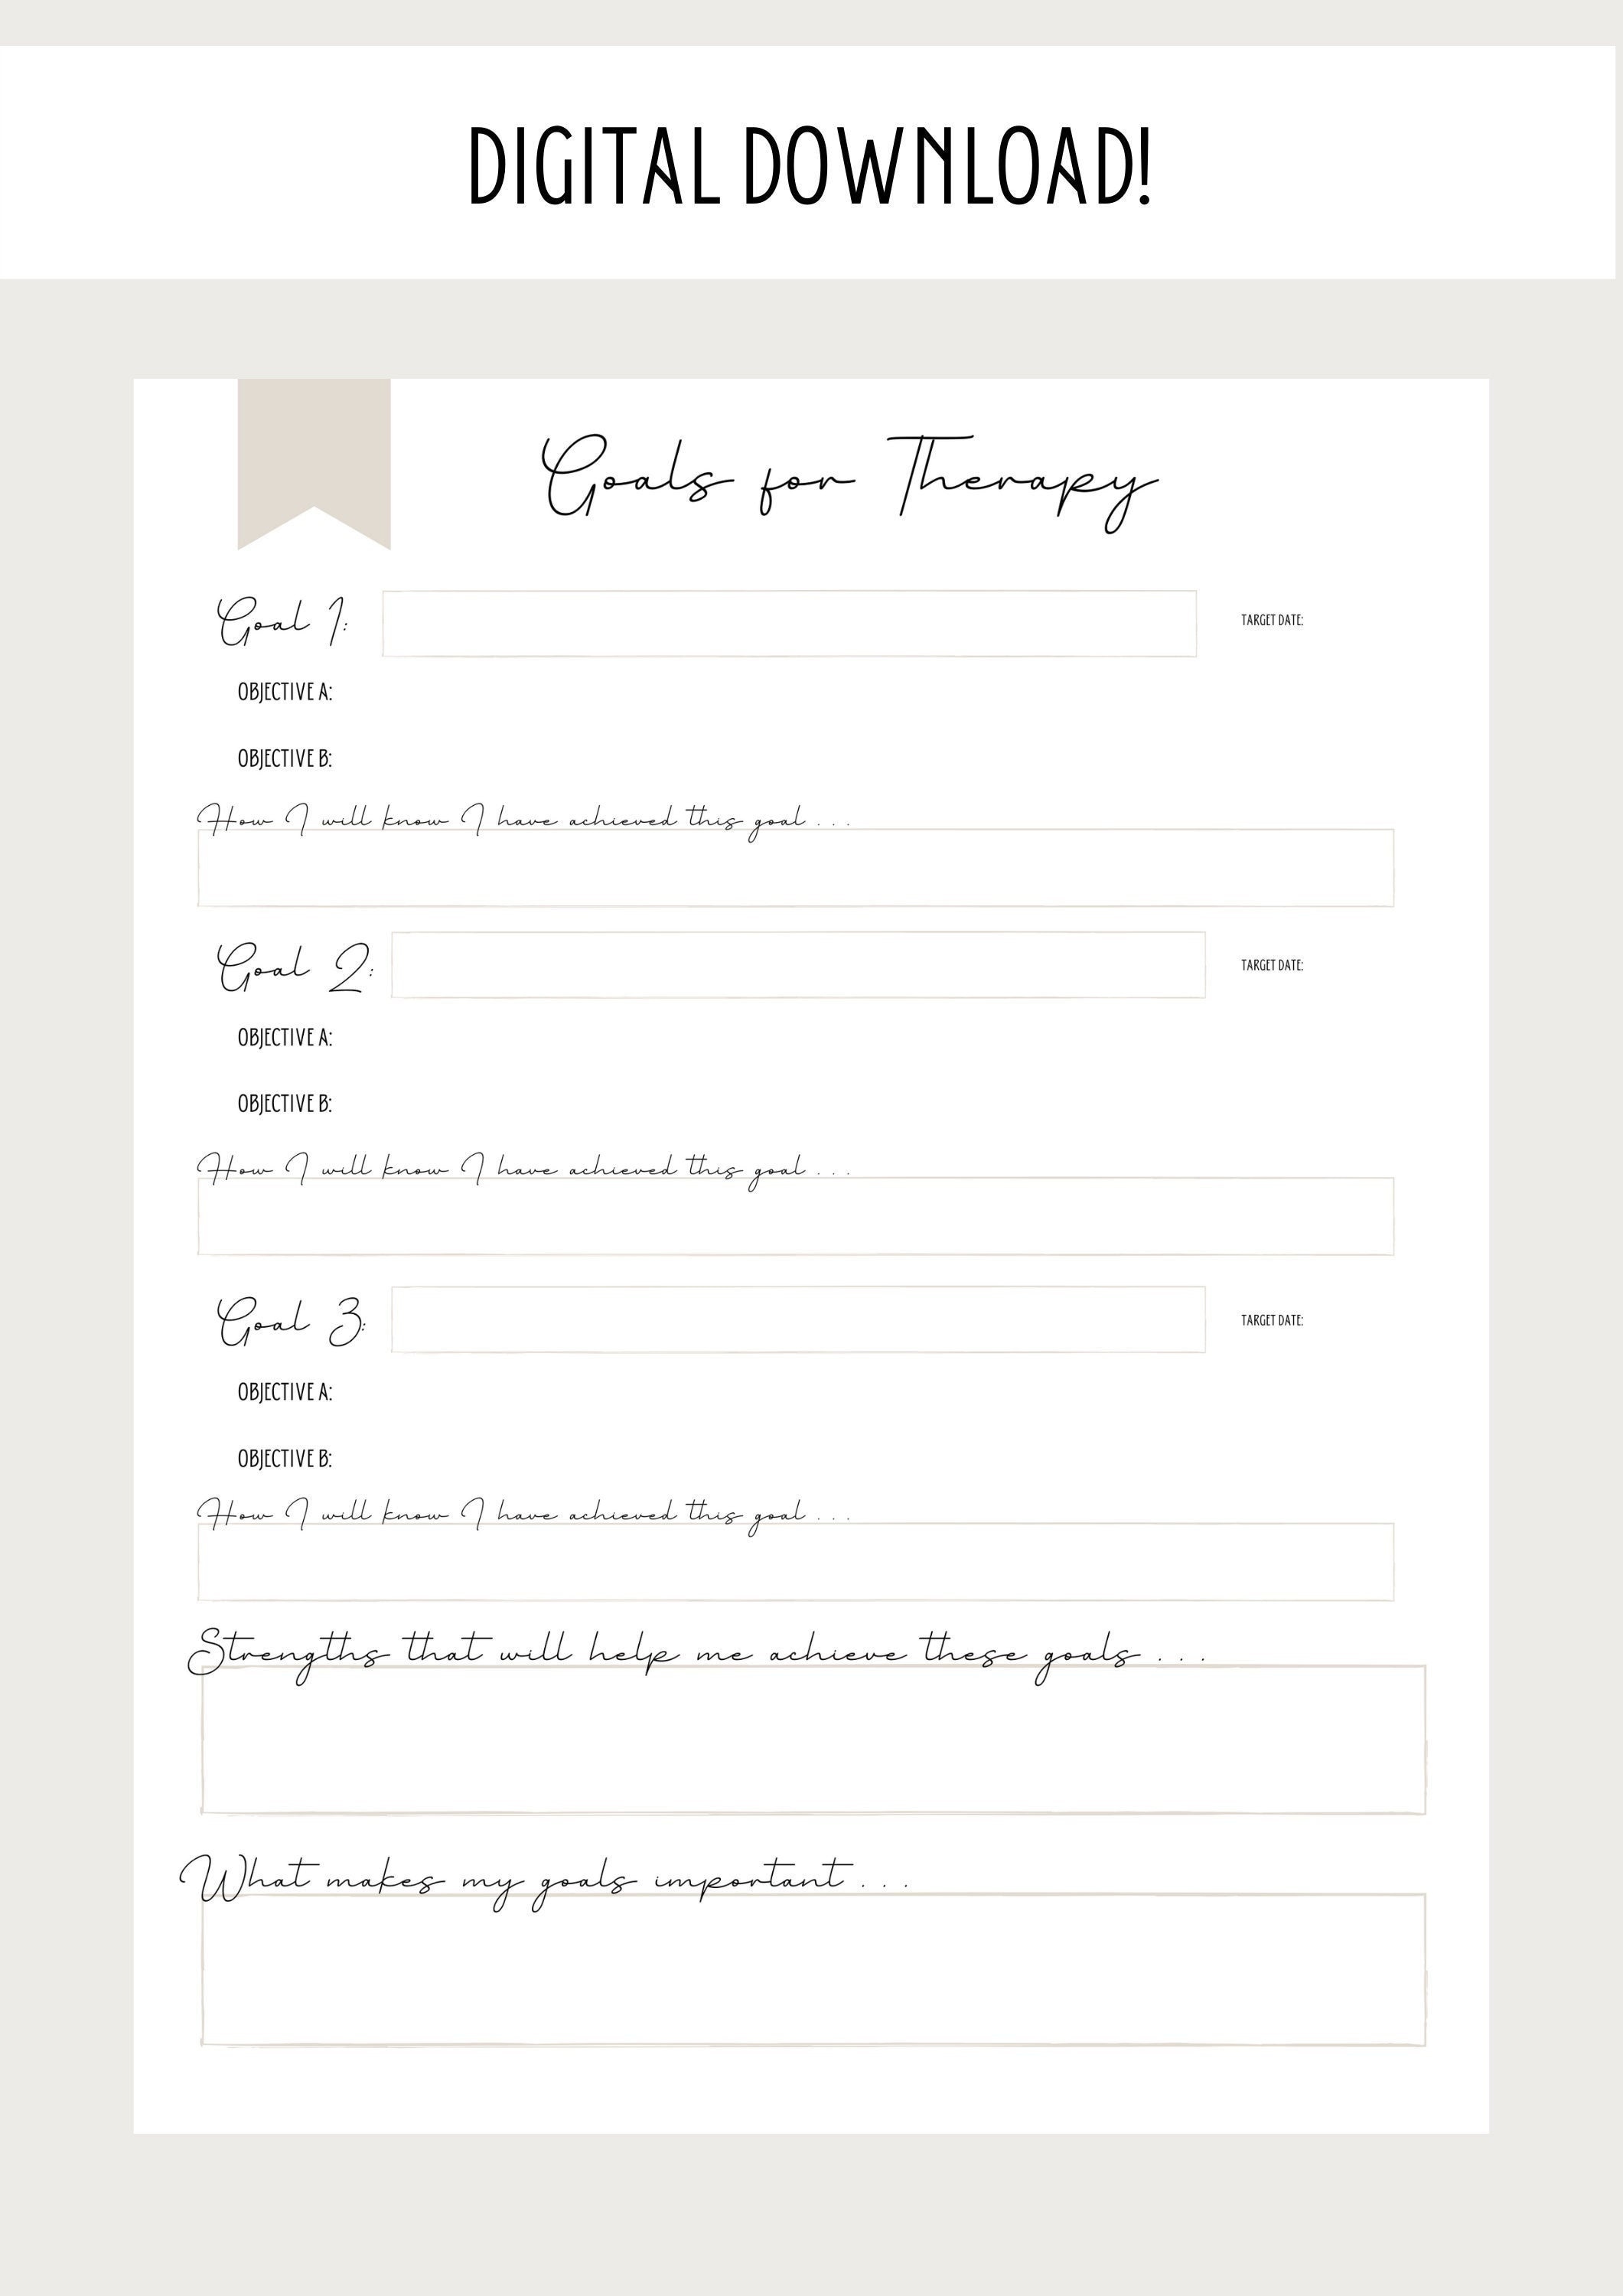 Pieces of Me Therapy Worksheet (Instant Download) 